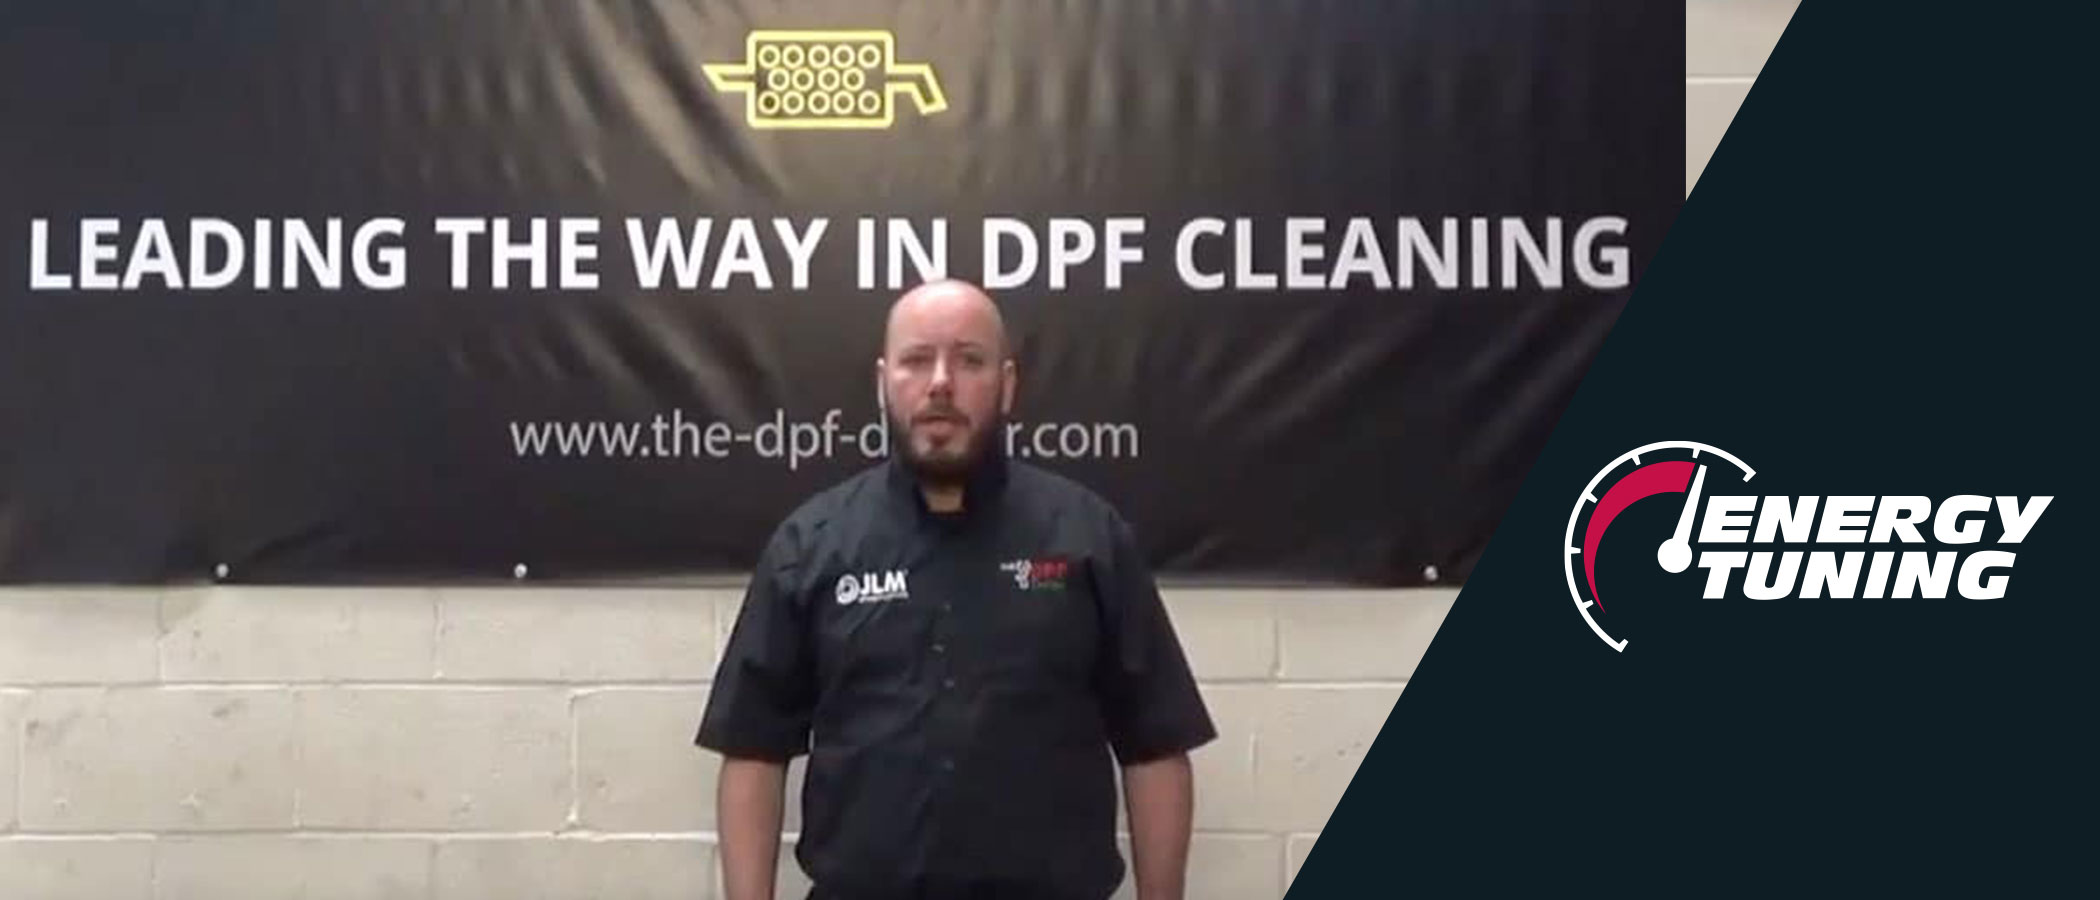 dpf-cleaning-2017